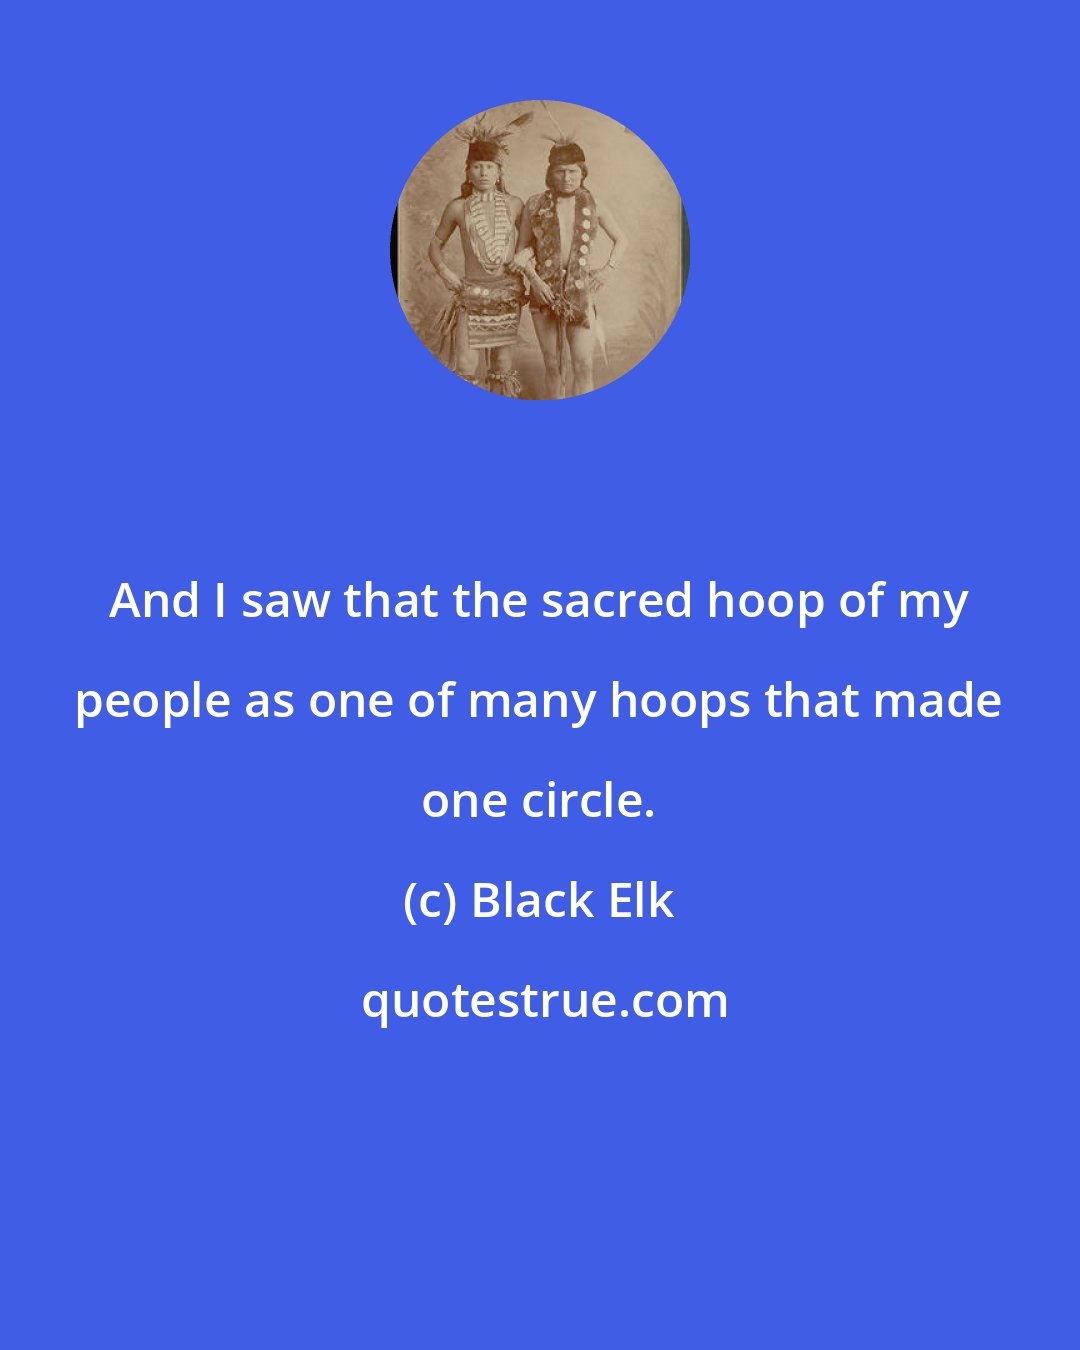 Black Elk: And I saw that the sacred hoop of my people as one of many hoops that made one circle.